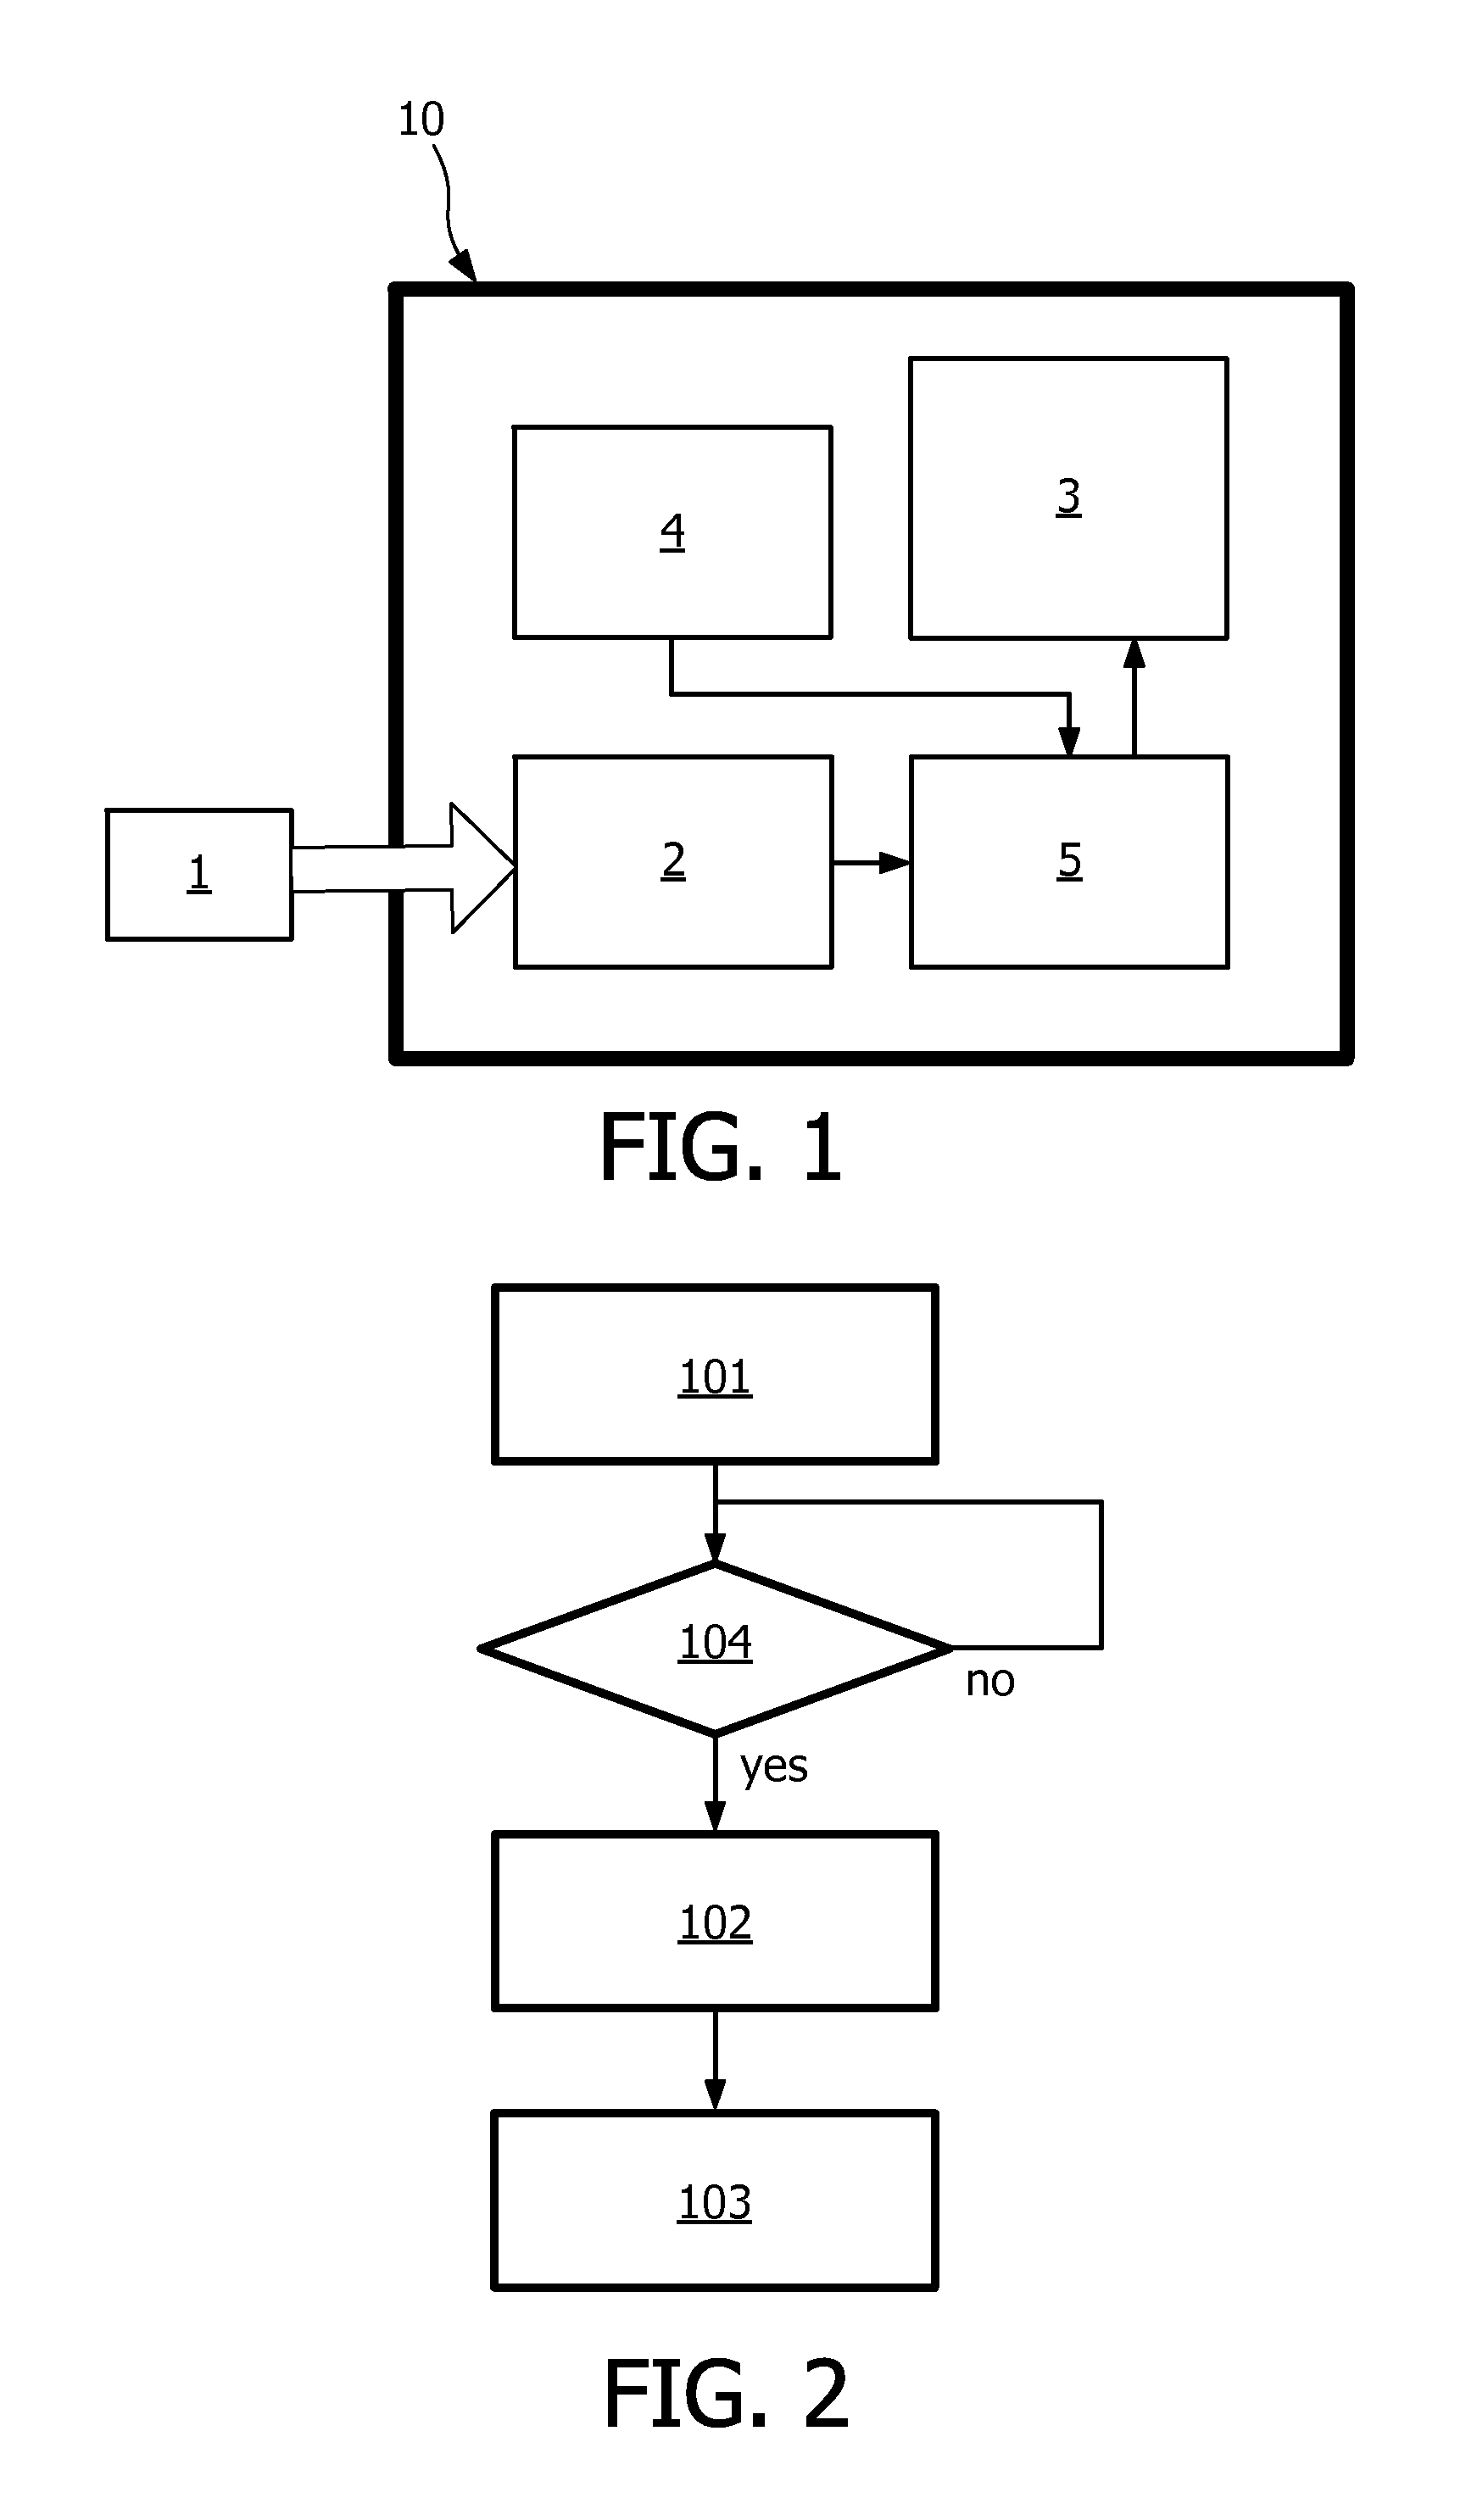 Object, method and system for transmitting information to a user